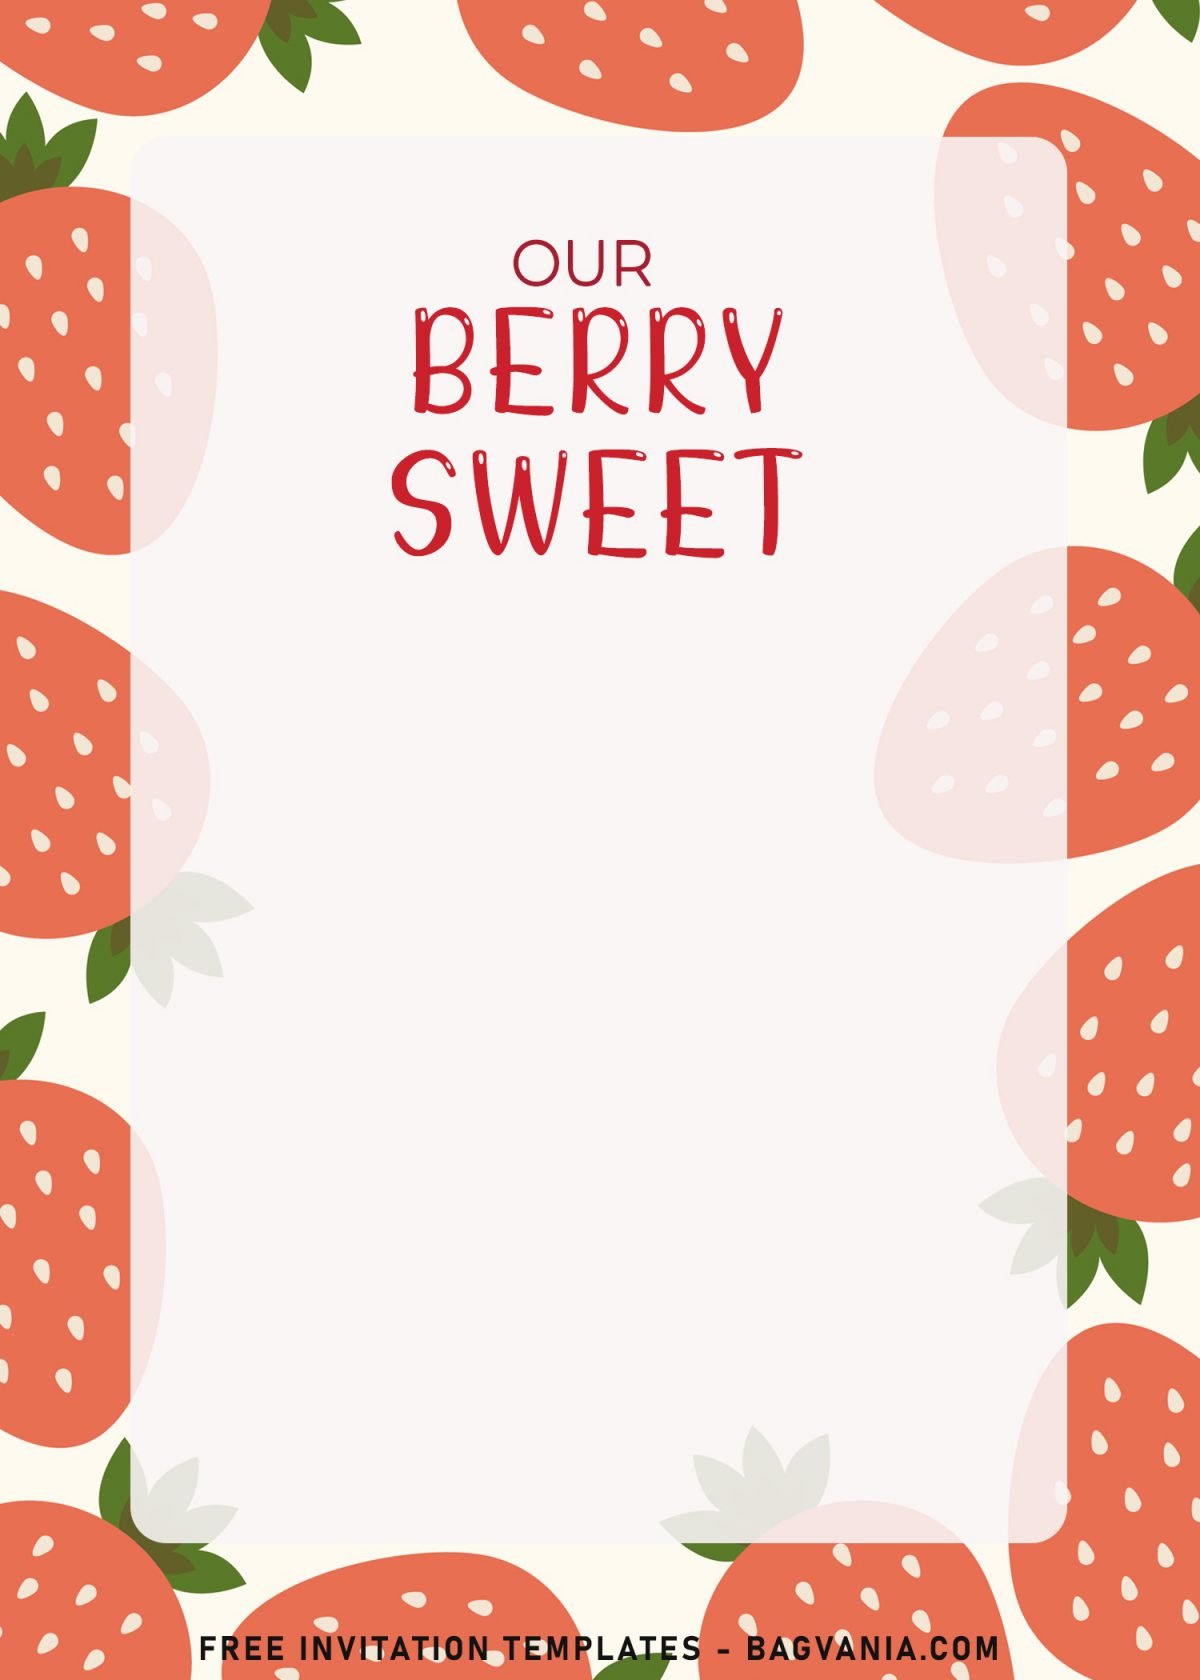 8+ Strawberry Birthday Invitation Templates For Girl Birthday Party and has portrait design